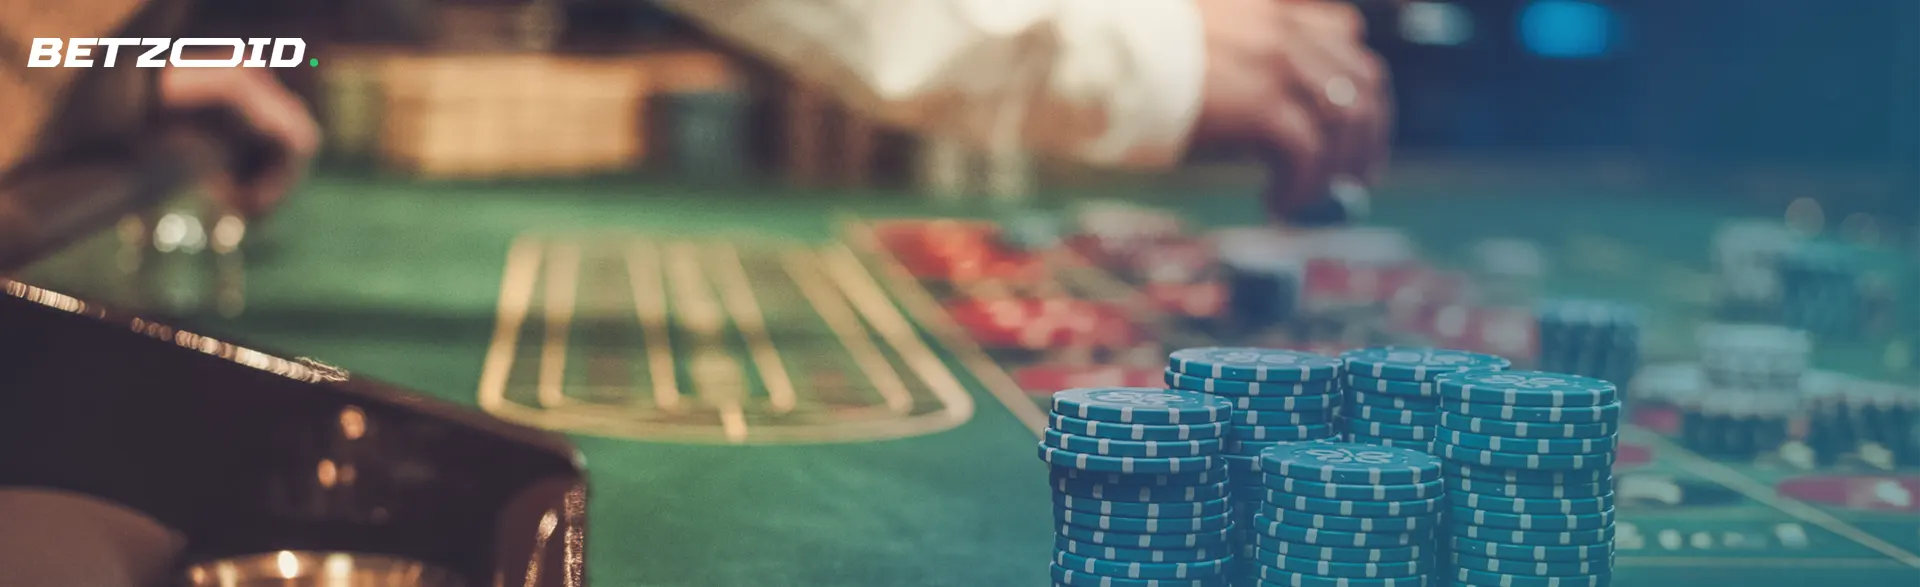 A casino scene with a focus on chips and gaming tables, representing legal online casinos.